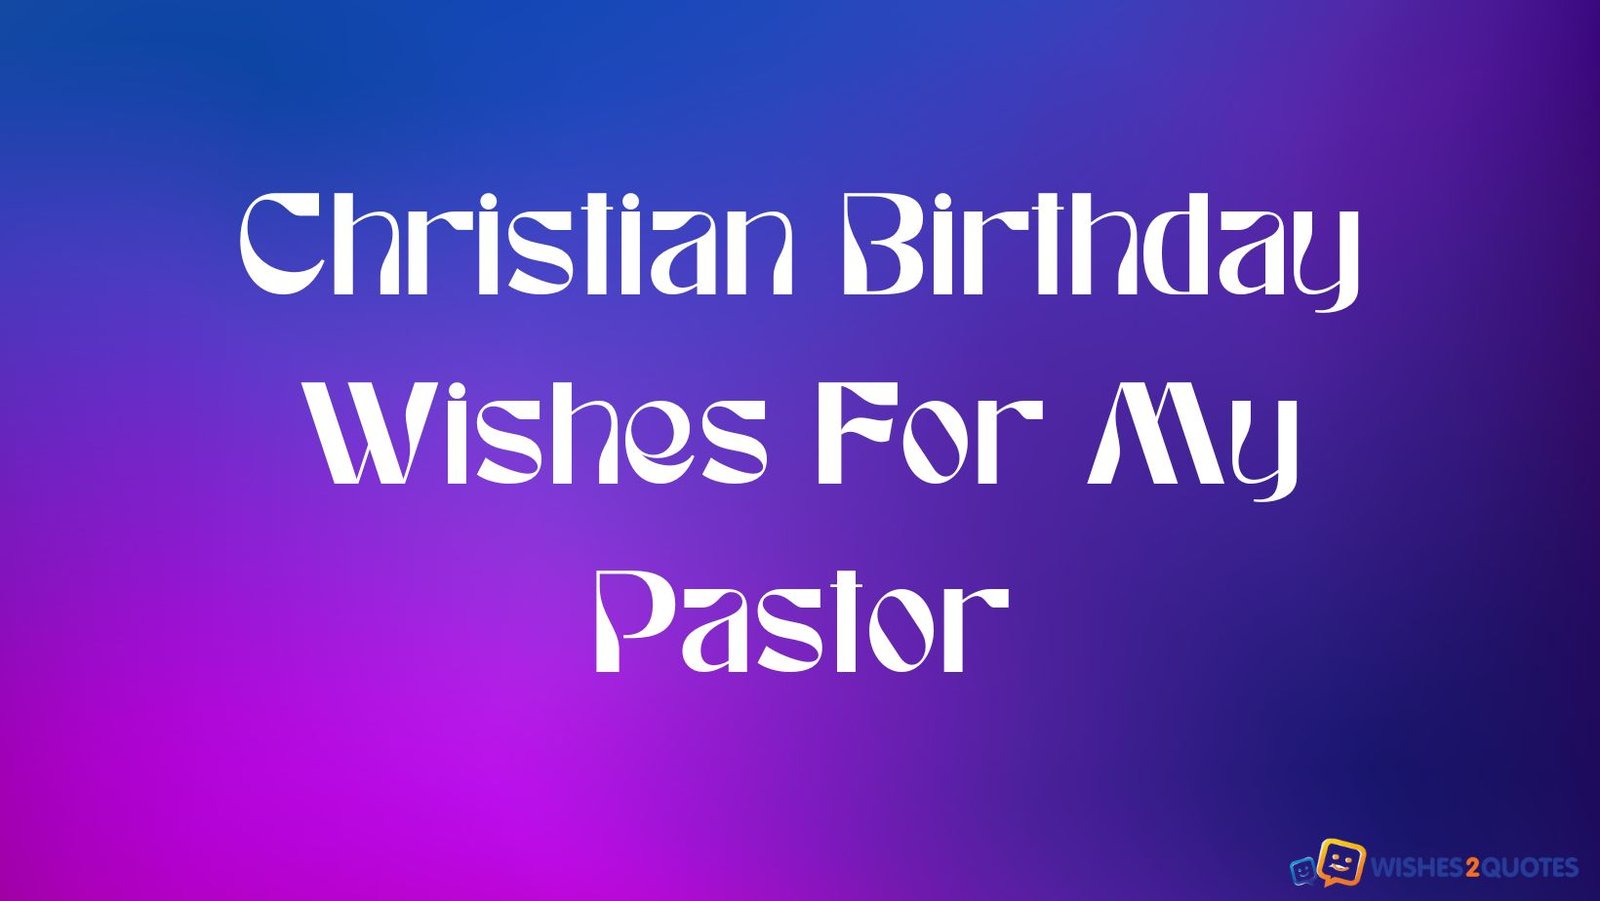 Christian Birthday Wishes For My Pastor